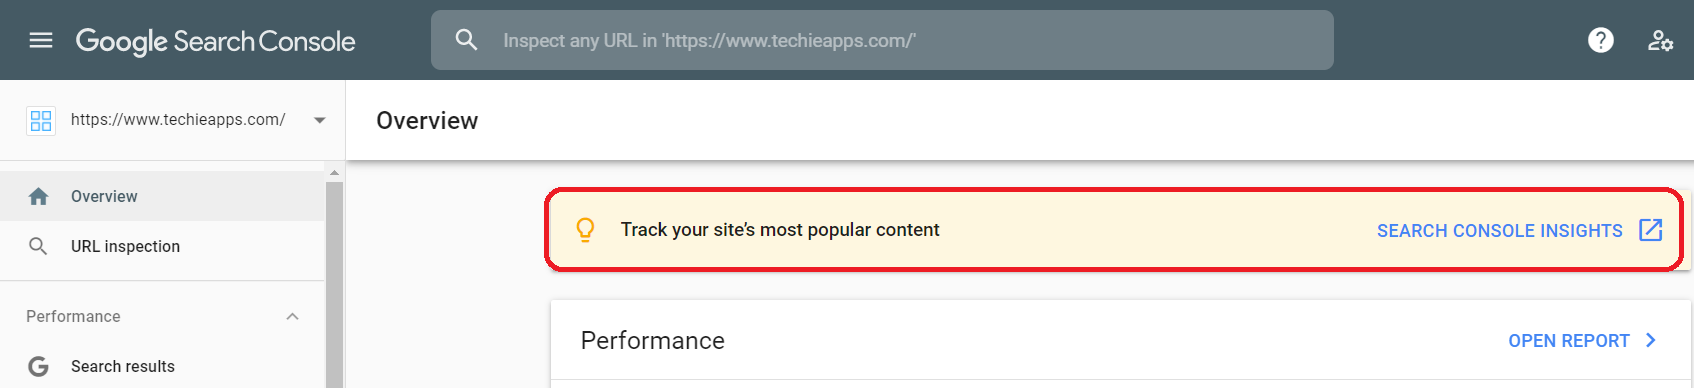 Google Search Console Insights Techieapps